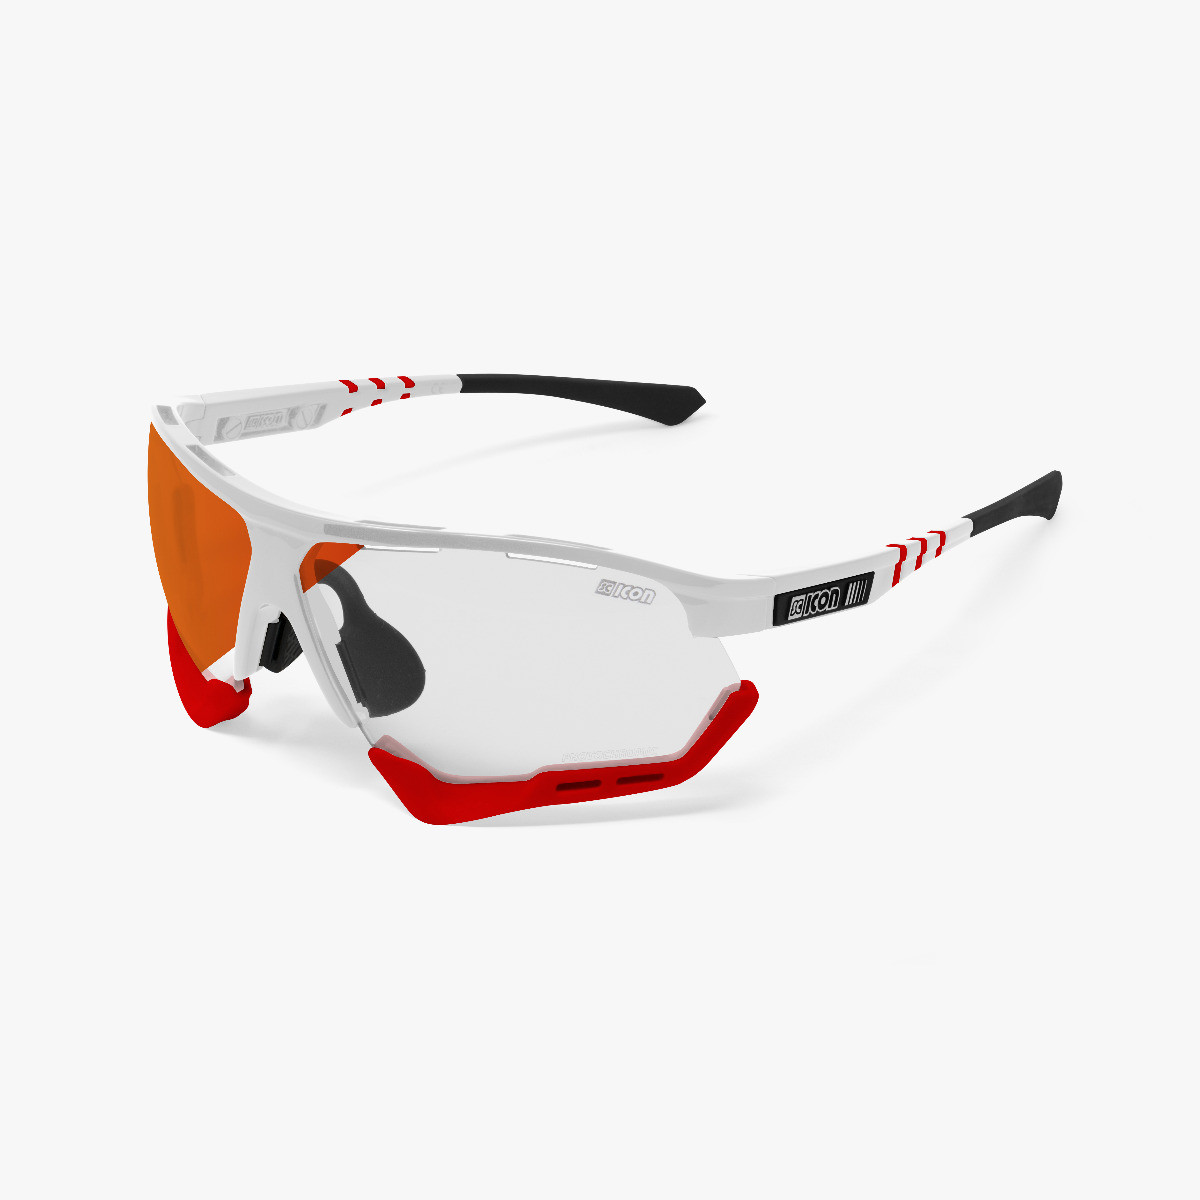 Aerocomfort cycling sunglasses scnxt photochromic white frame red lenses EY19160403
